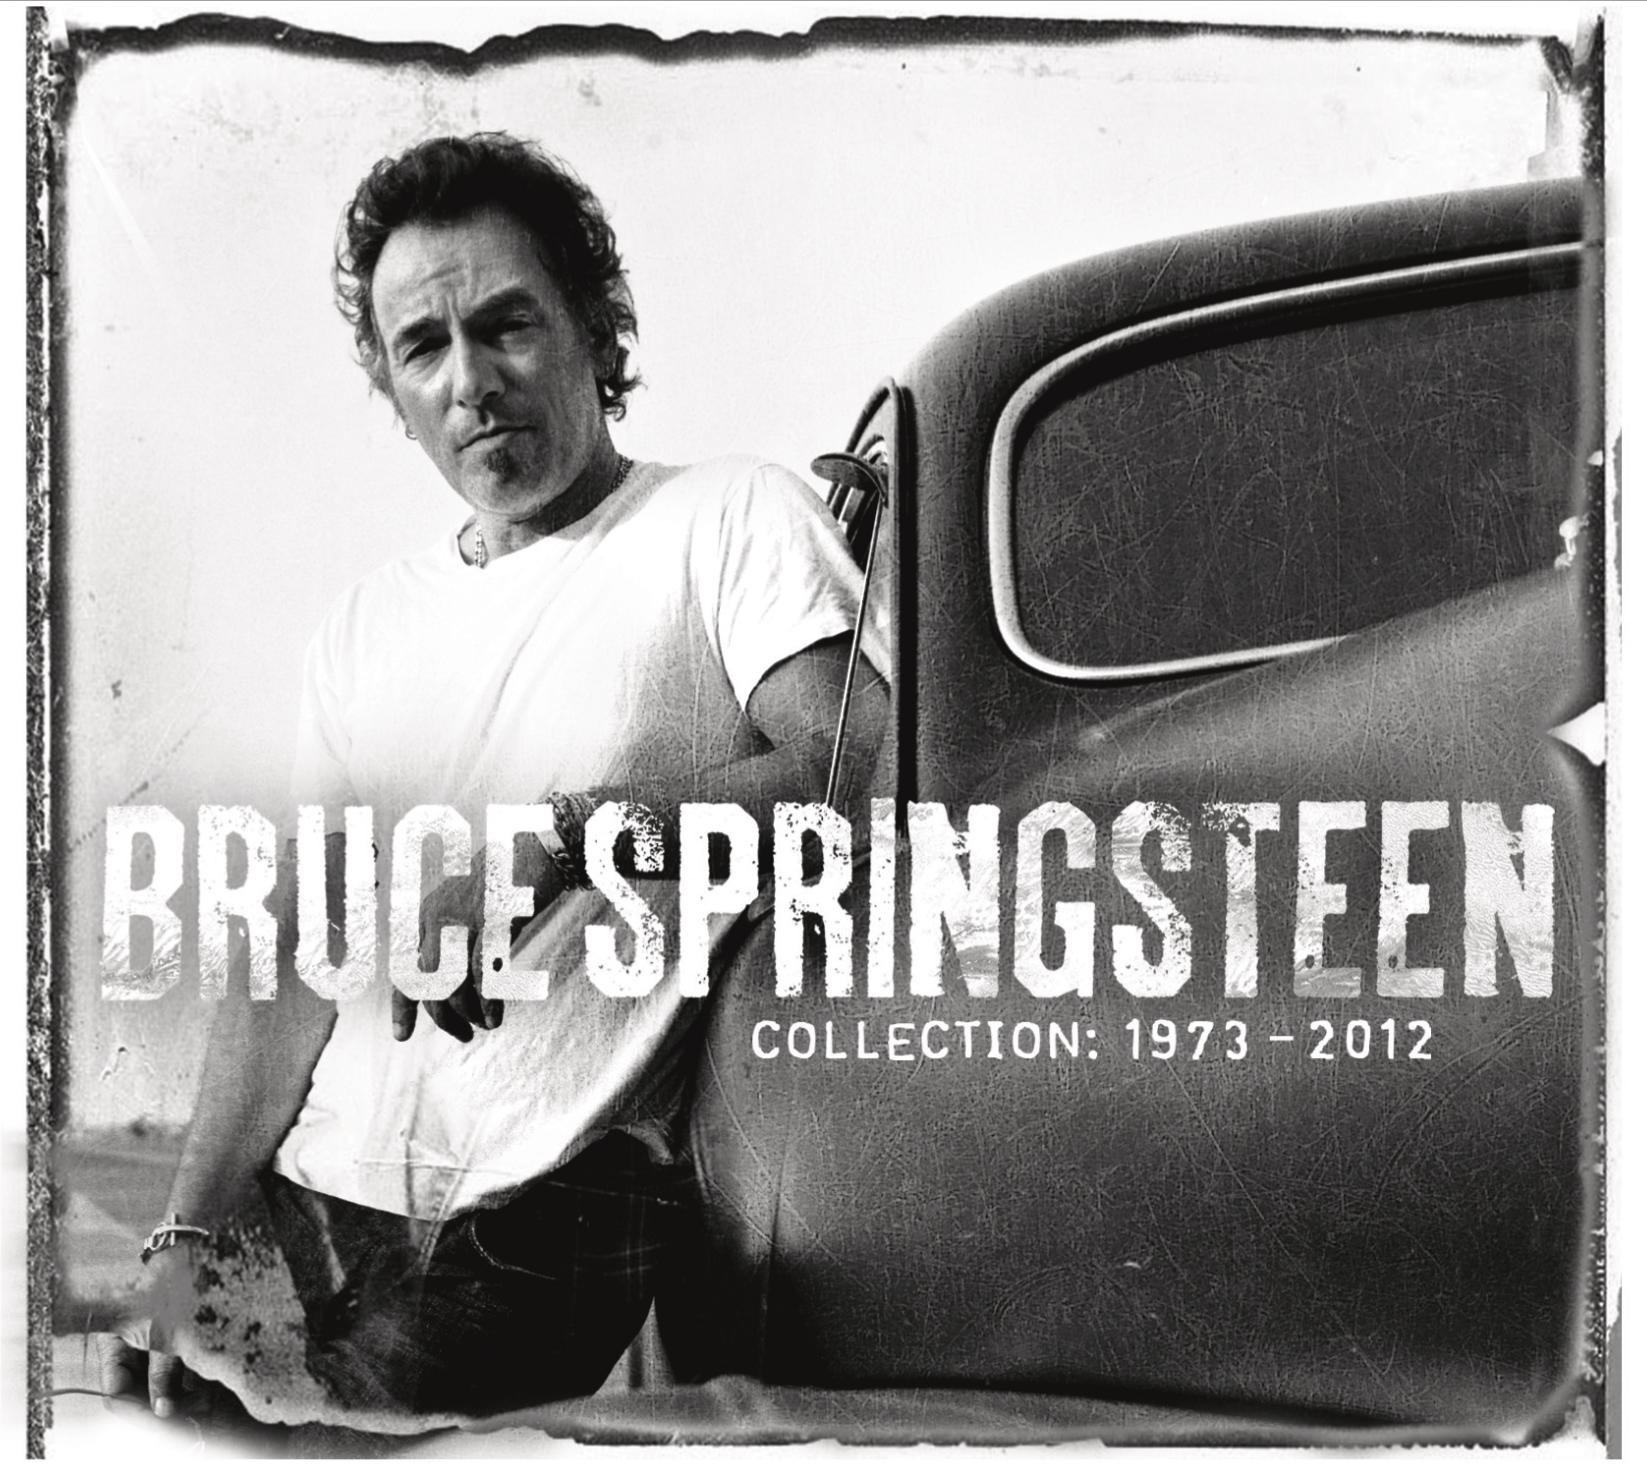 Bruce Springsteen - "Collection: 1973-2012"